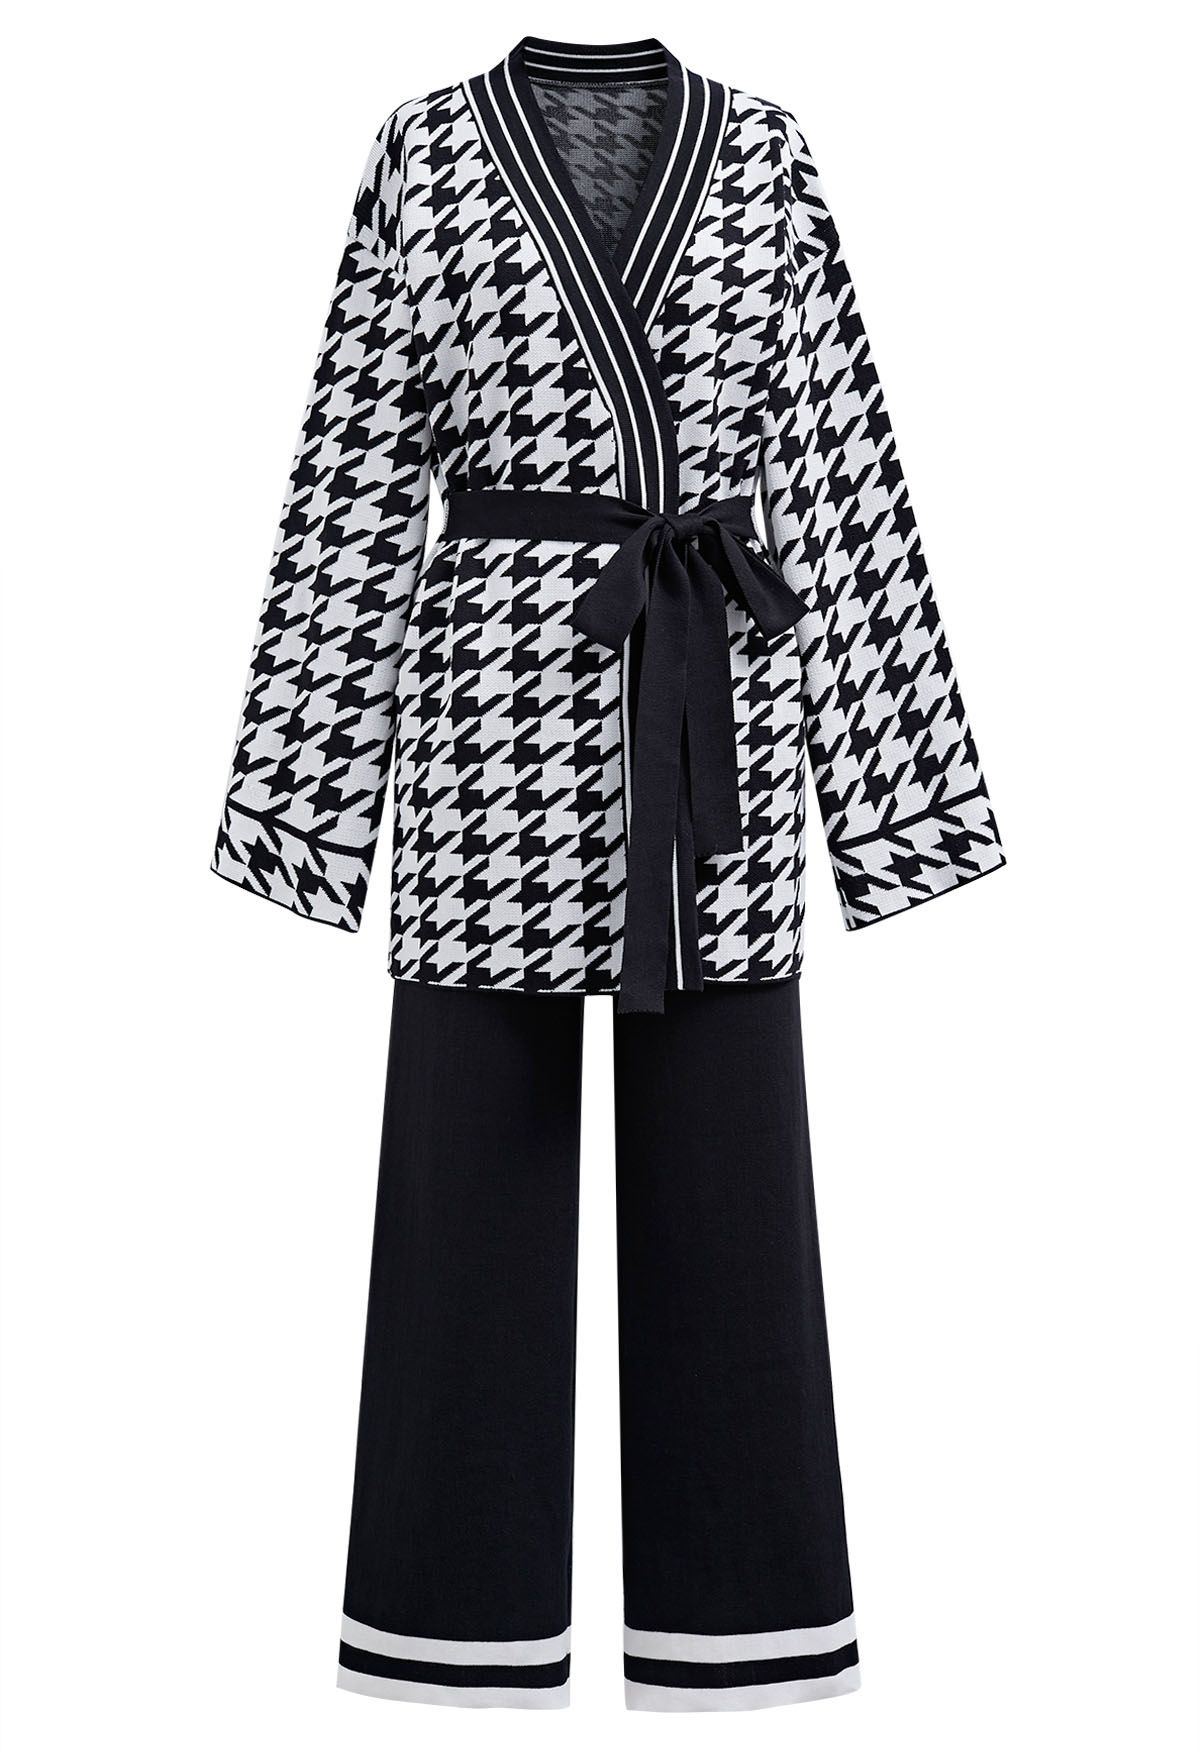 Houndstooth Self-Tie Wrap Knitted Cardigan and Pants Set in Black